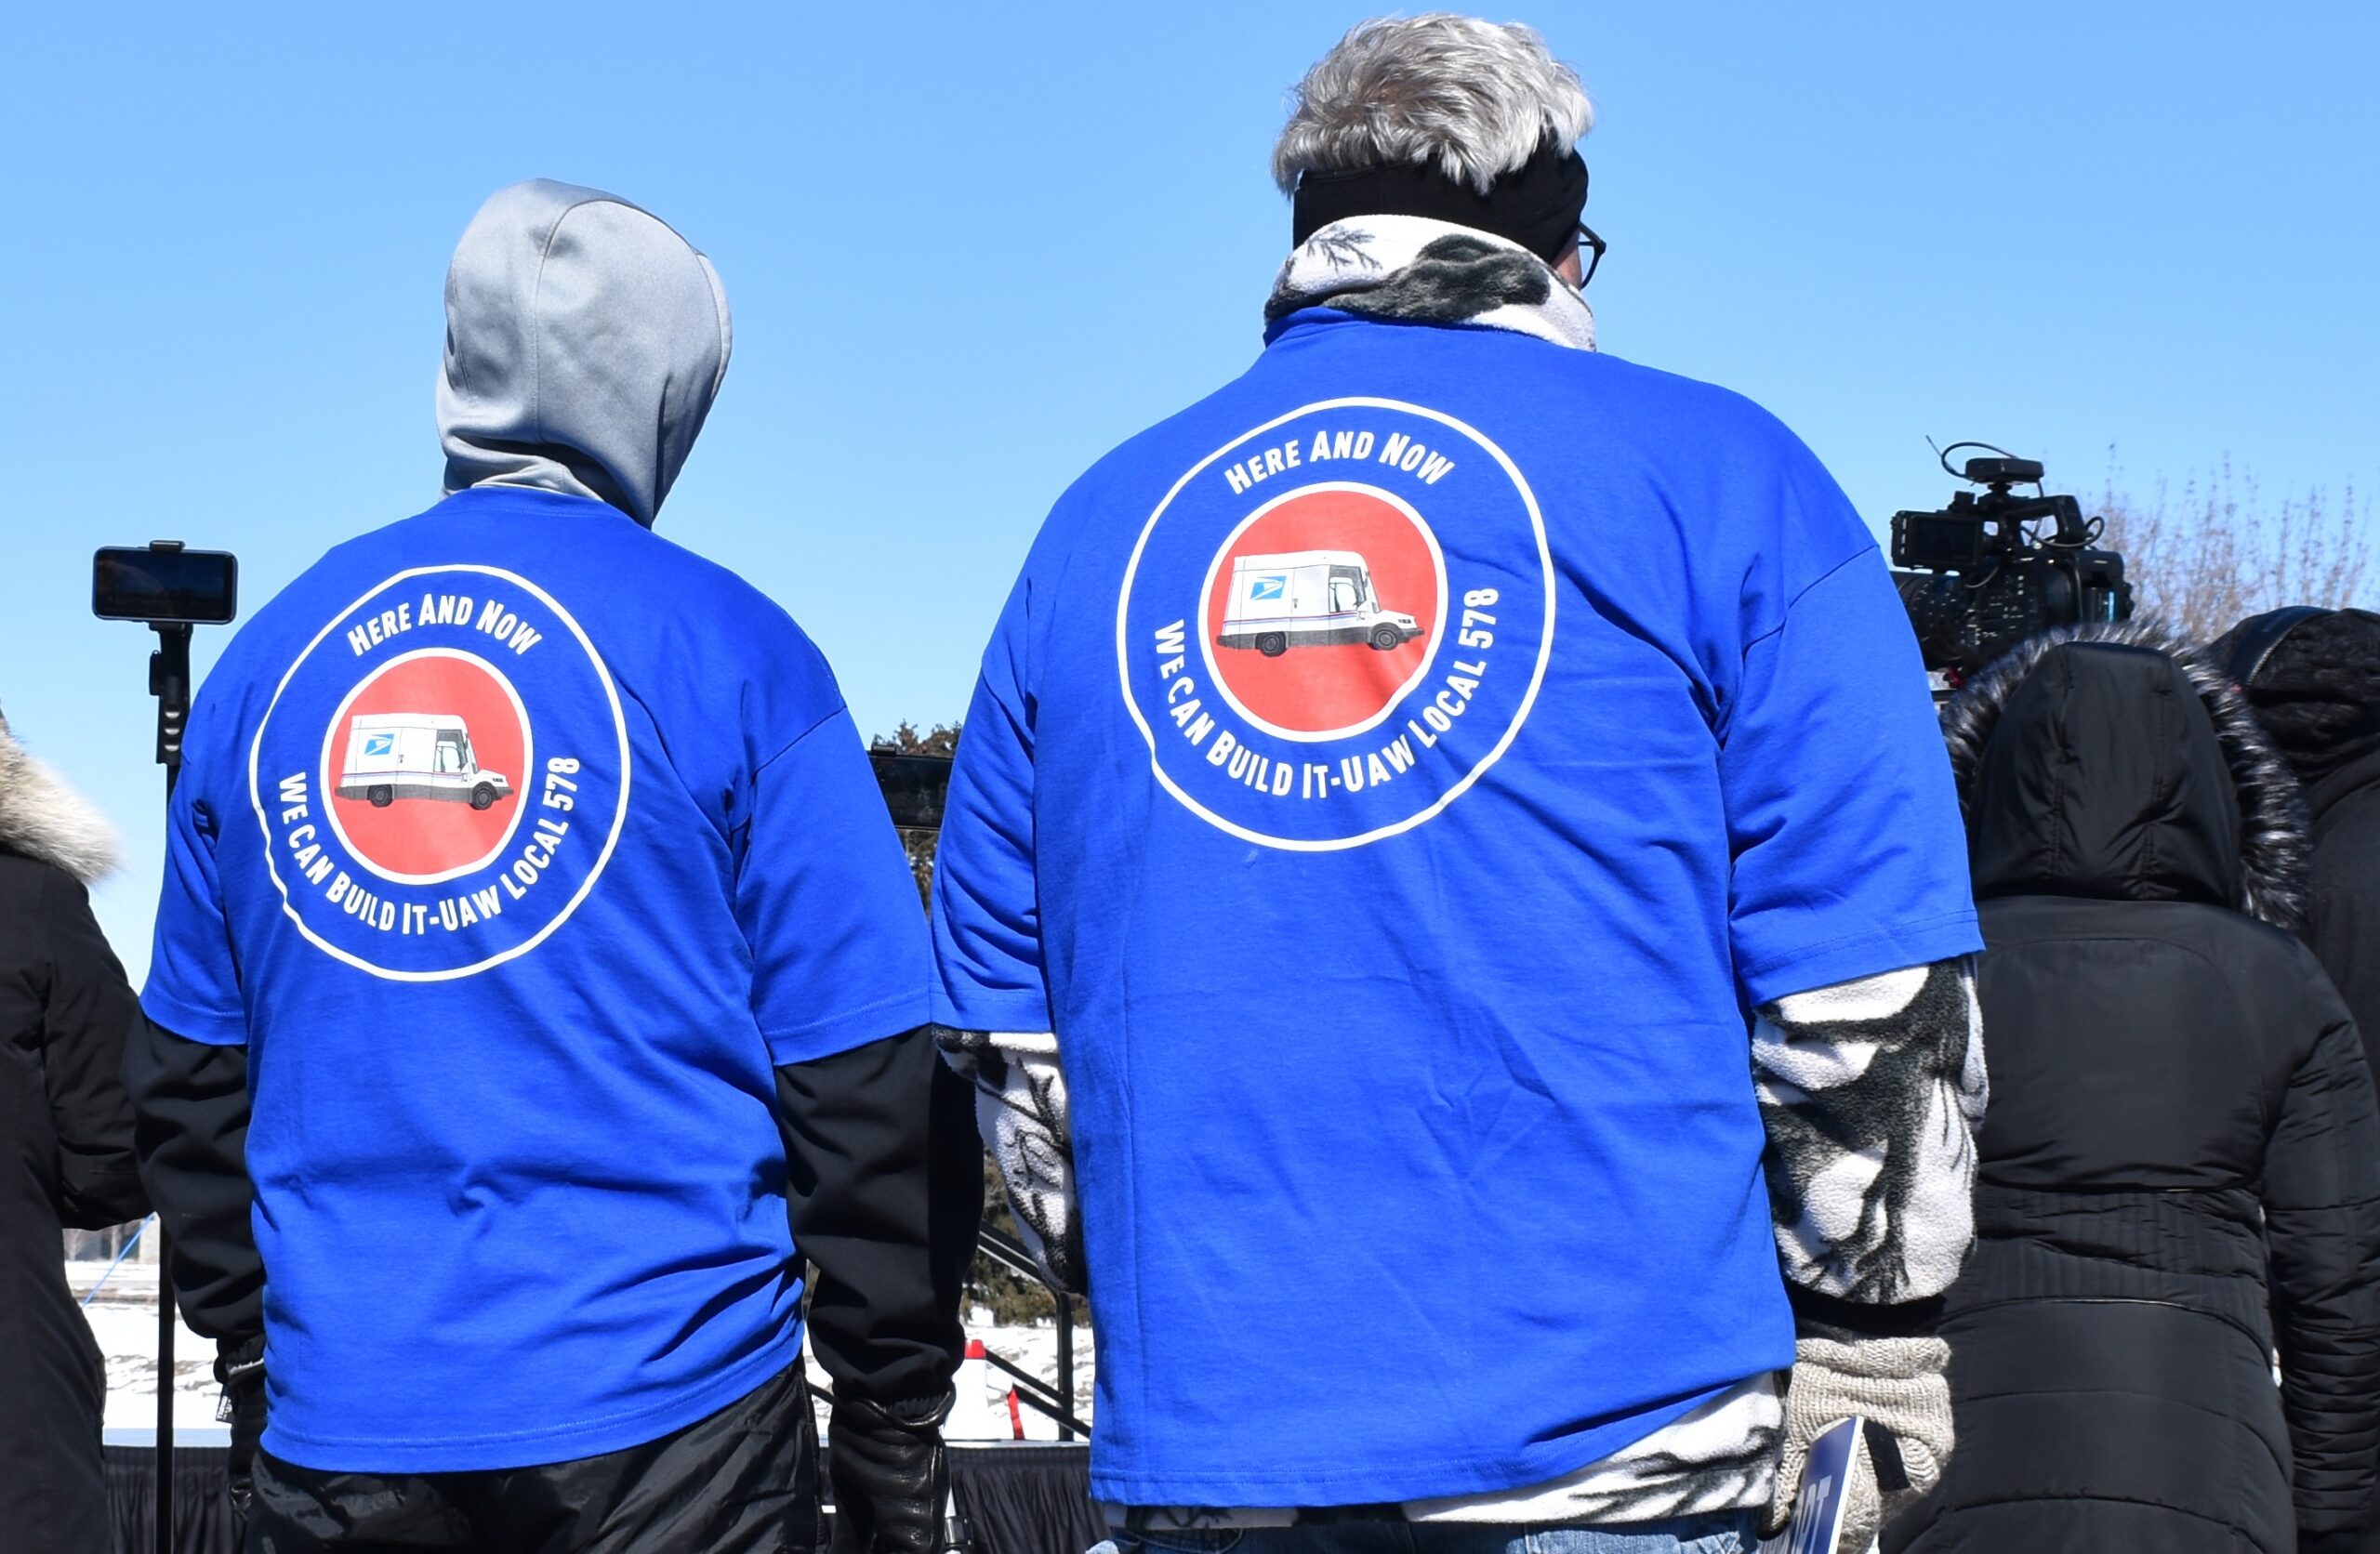 Union members' jackets call for the U.S. Postal Service's Next Generation Delivery Vehicle to be built by workers in Oshkosh